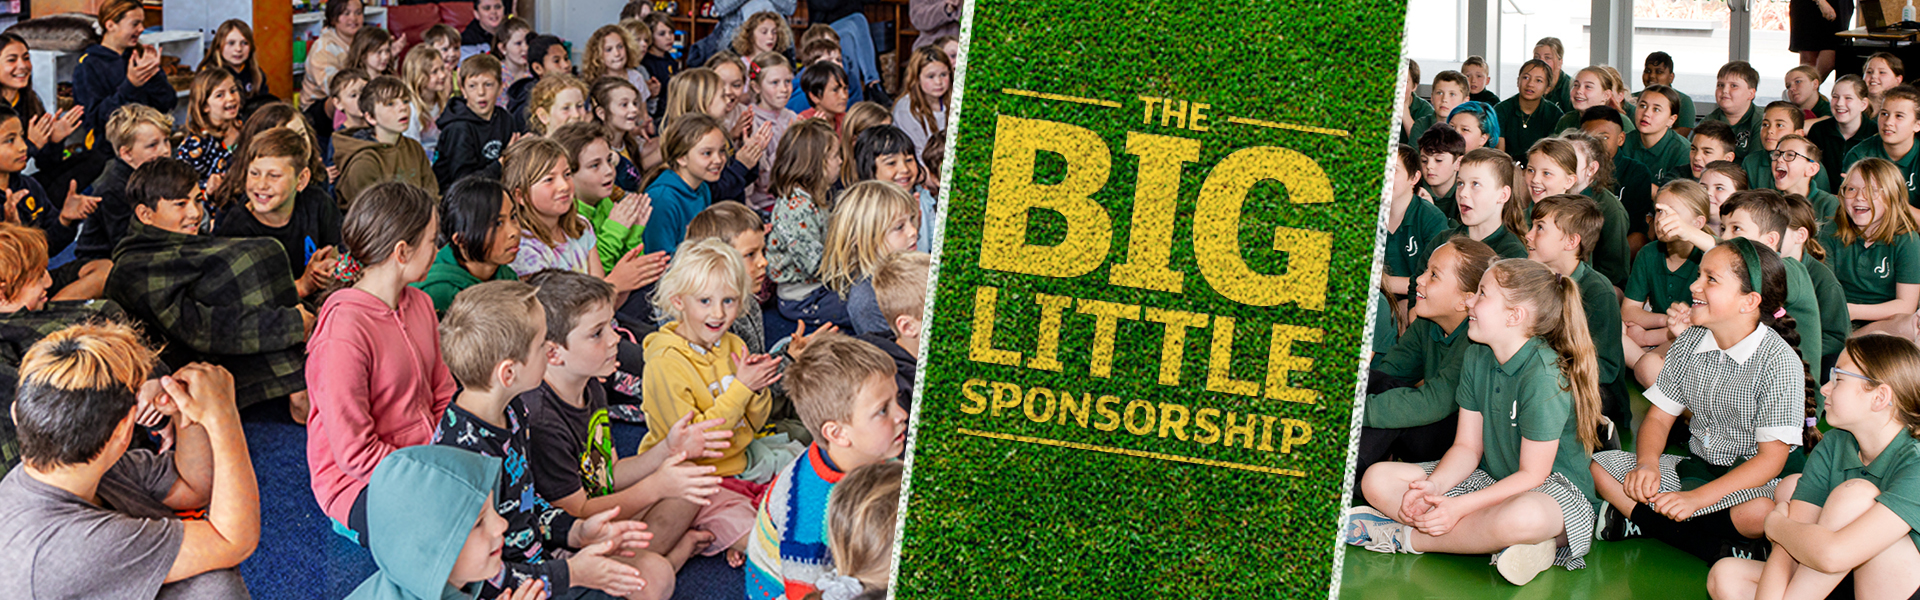 The 2021 winners of the Big Little Sponsorship